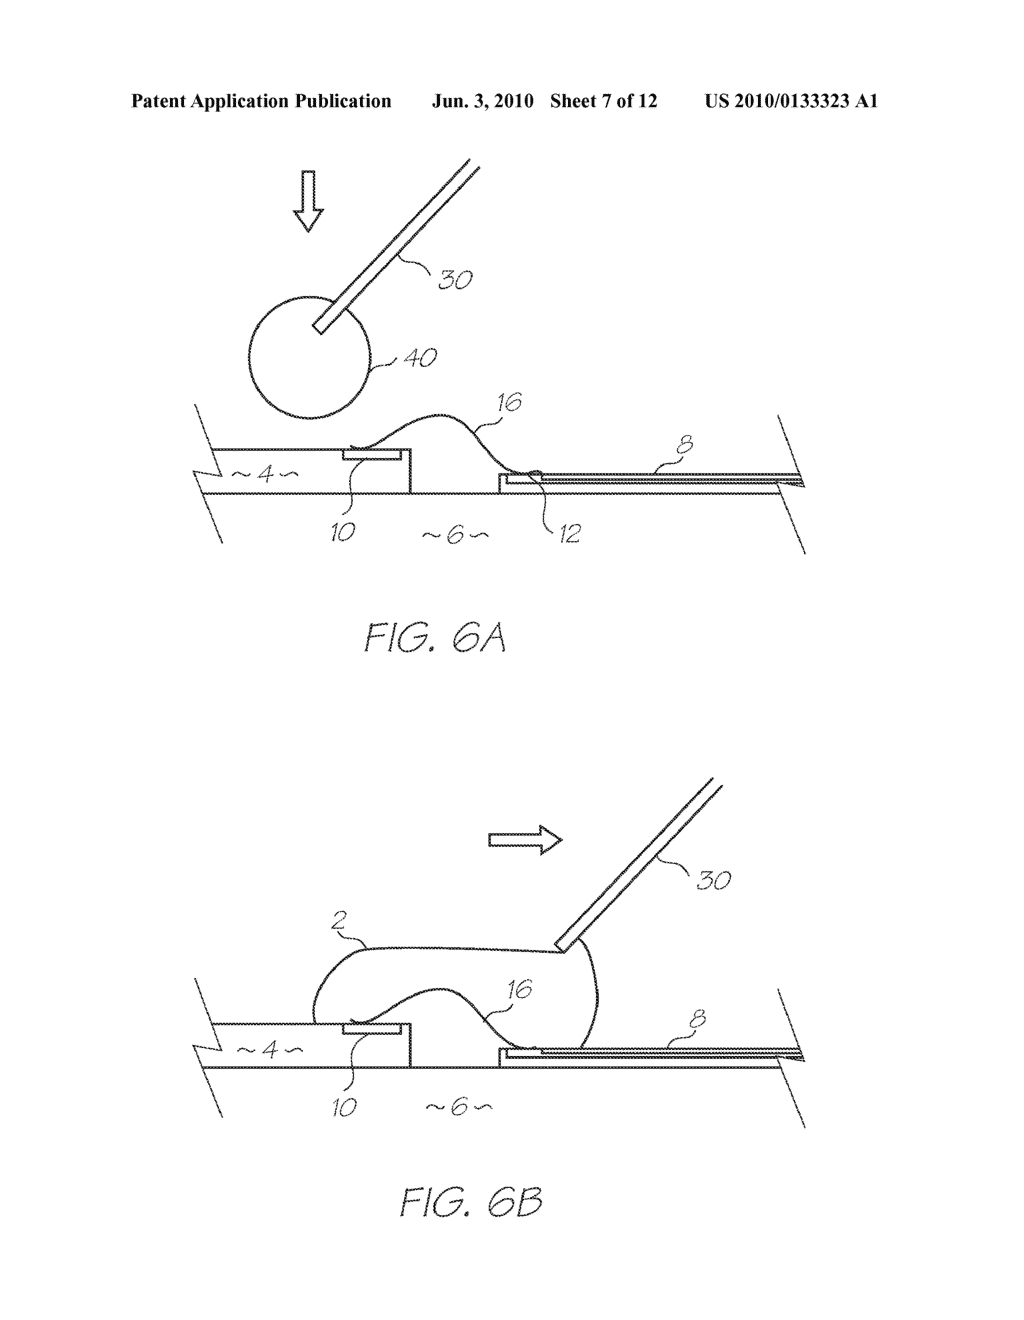 METHOD OF WIRE BONDING AN INTEGRATED CIRCUIT DIE AND A PRINTED CIRCUIT BOARD - diagram, schematic, and image 08